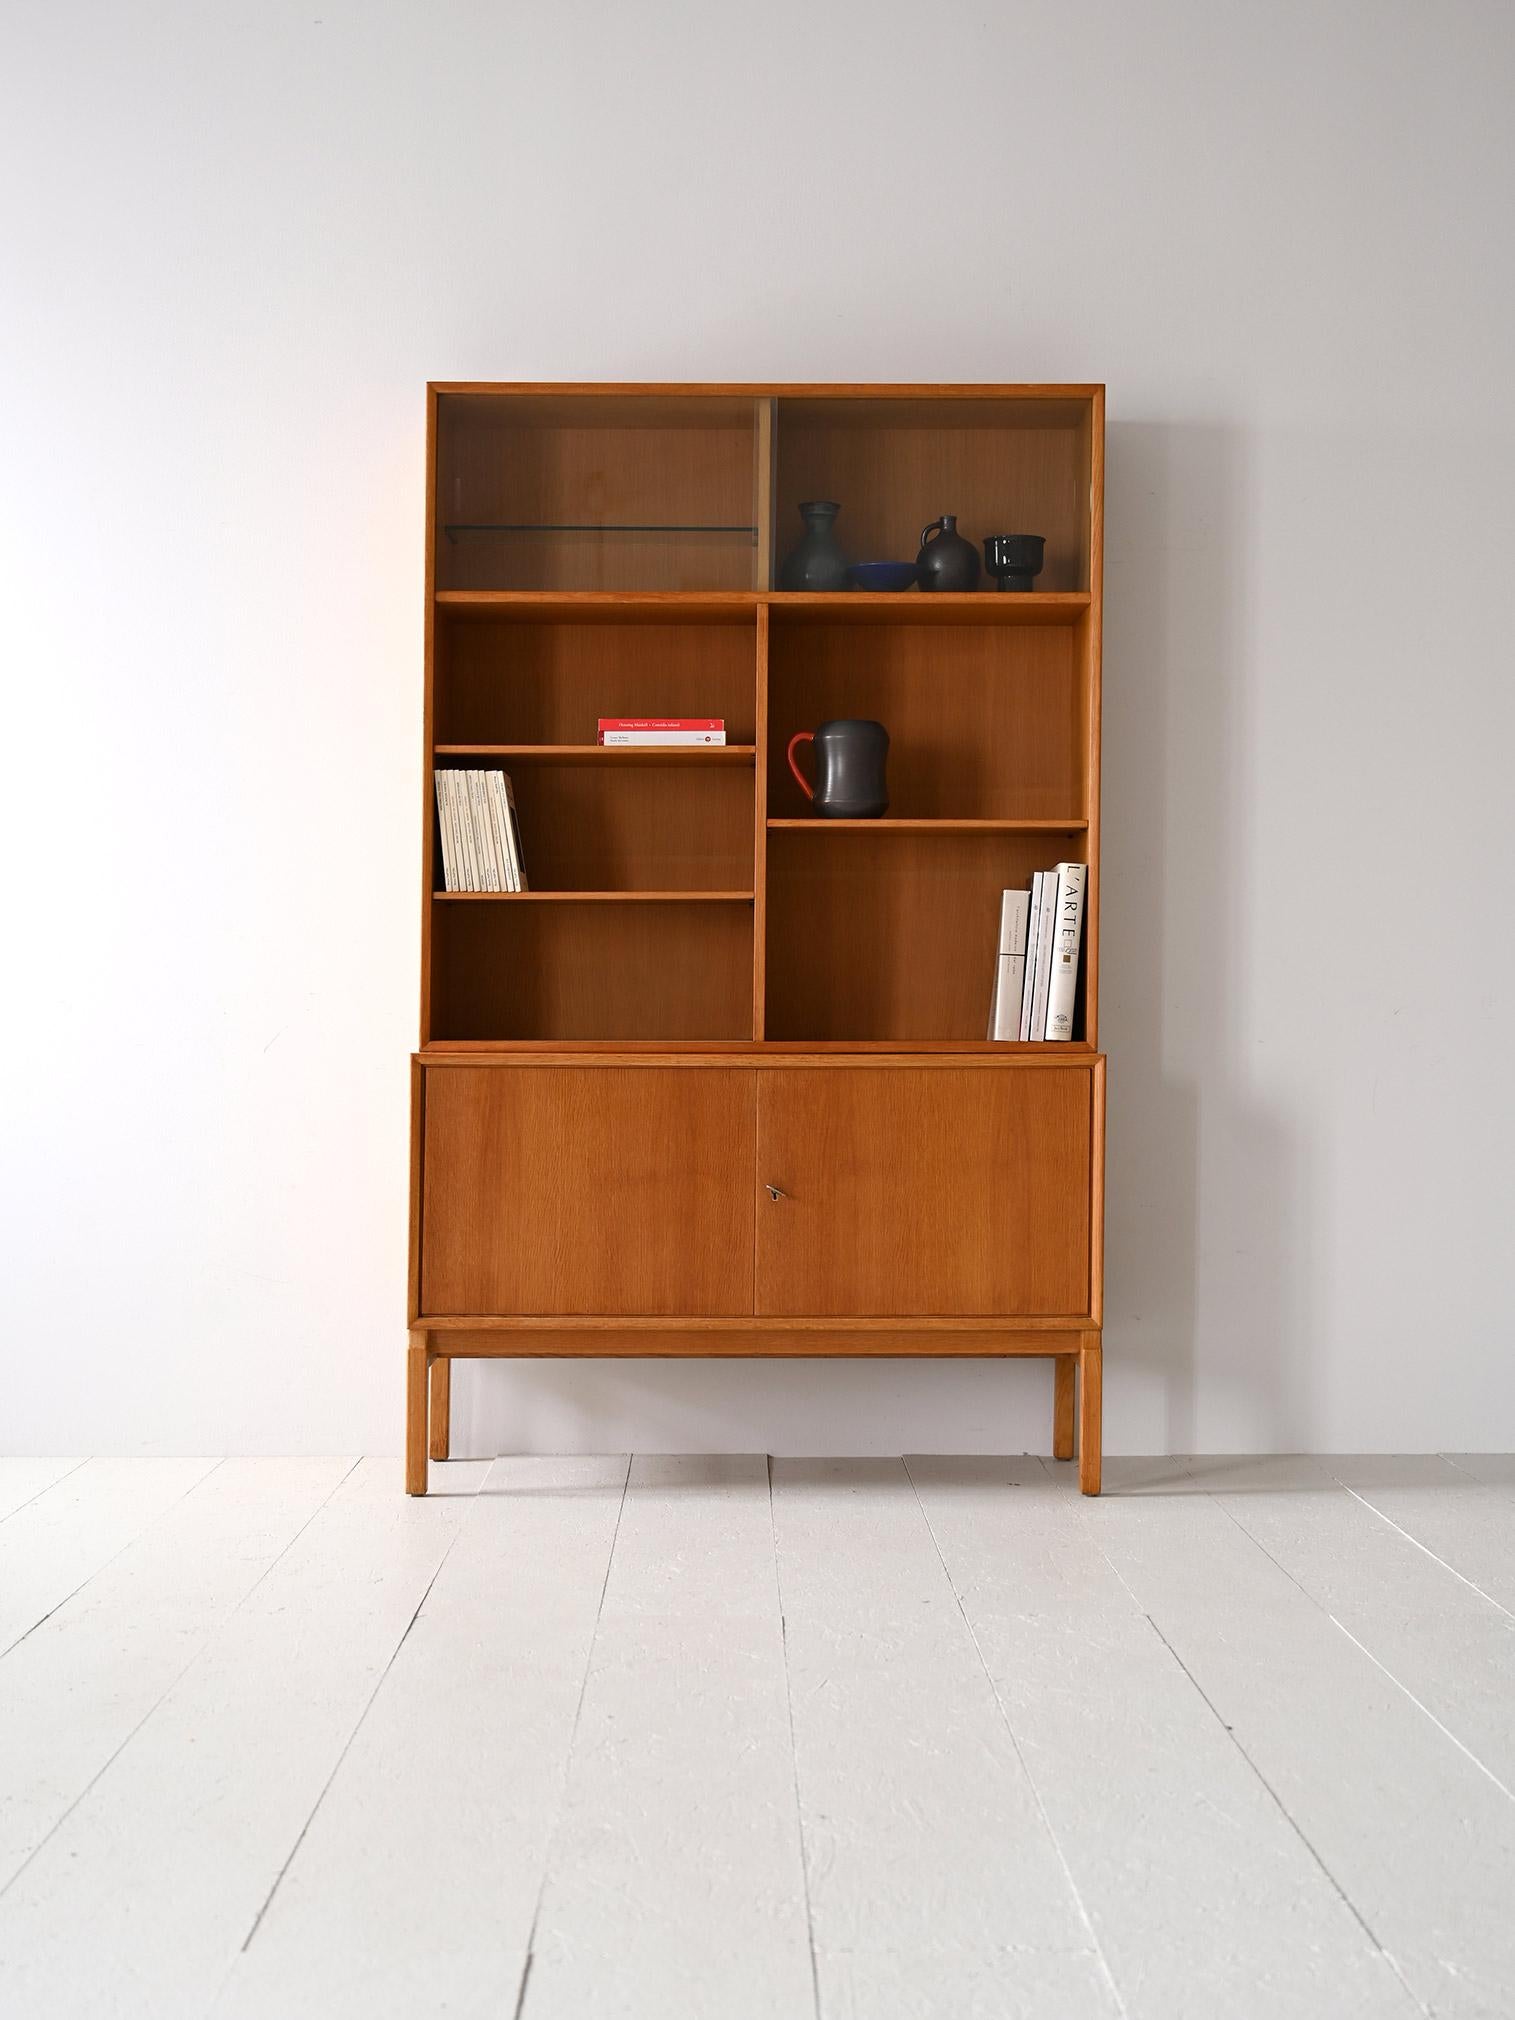 Scandinavian furniture from the 1960s consisting of two modules.

This Scandinavian modernist bookcase is distinguished by its modern lines and the light, golden shade of oak wood.
The lower part is a sideboard with hinged doors on which rests a